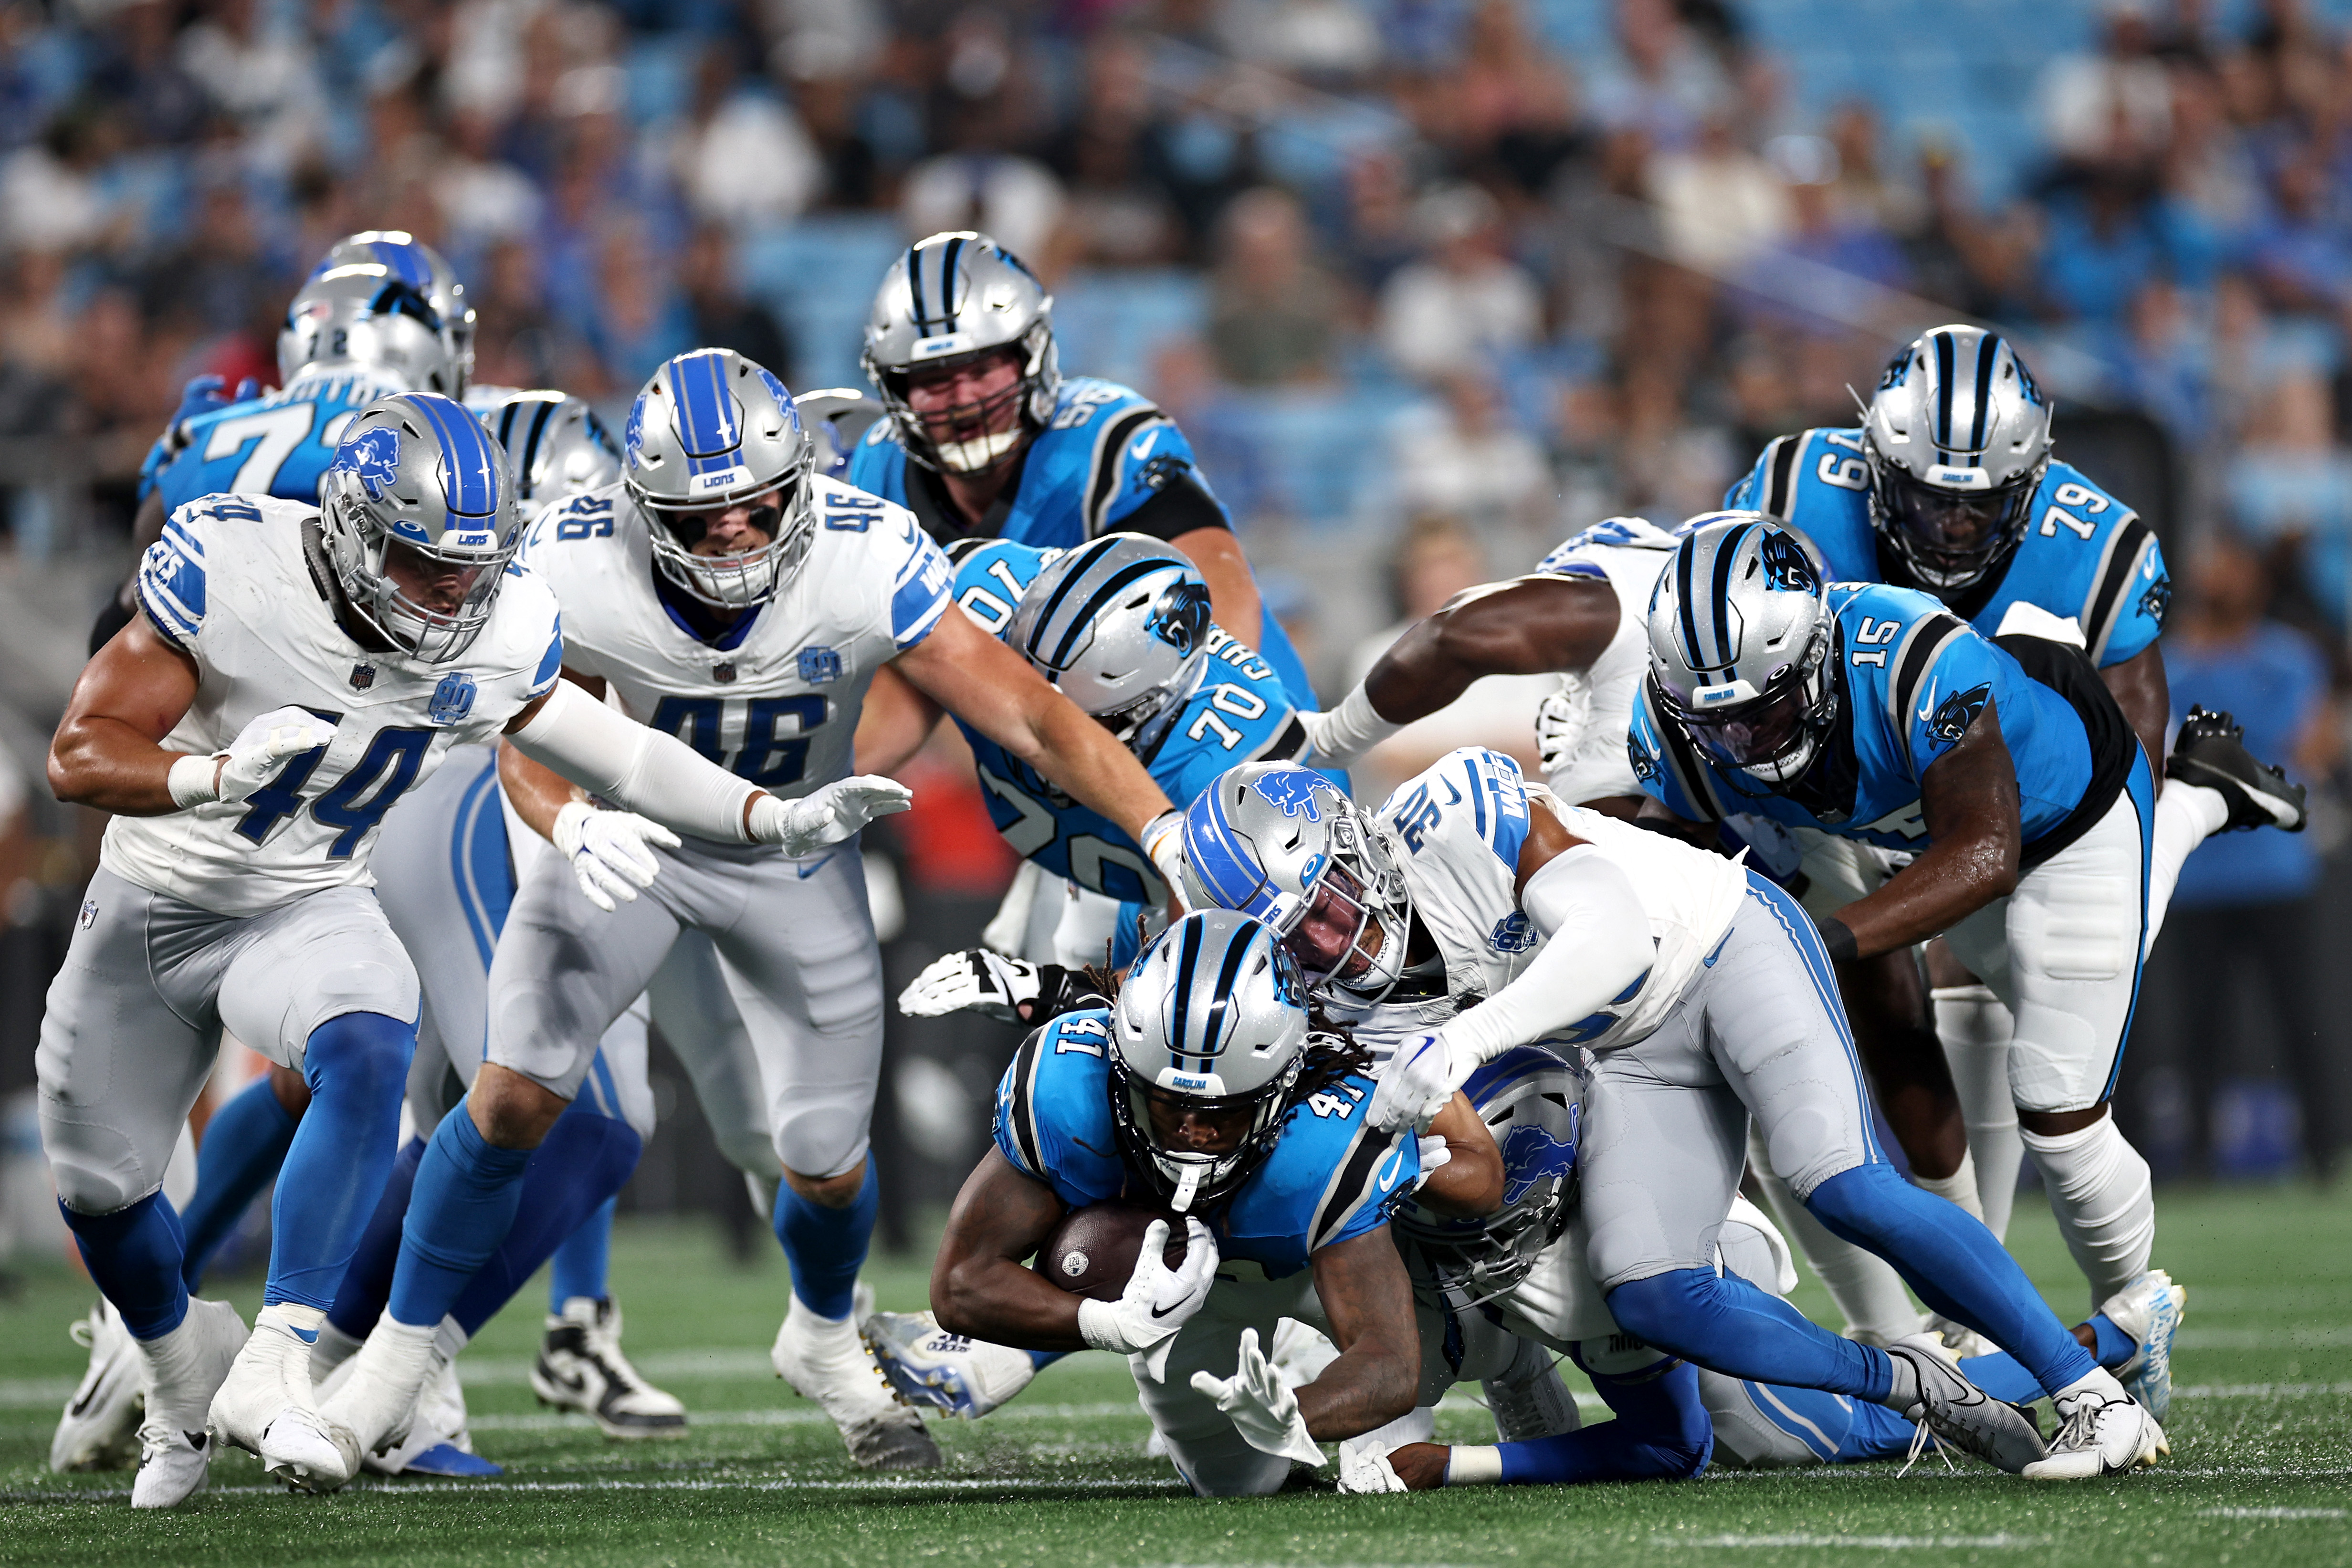 How to watch the Panthers-Lions preseason game